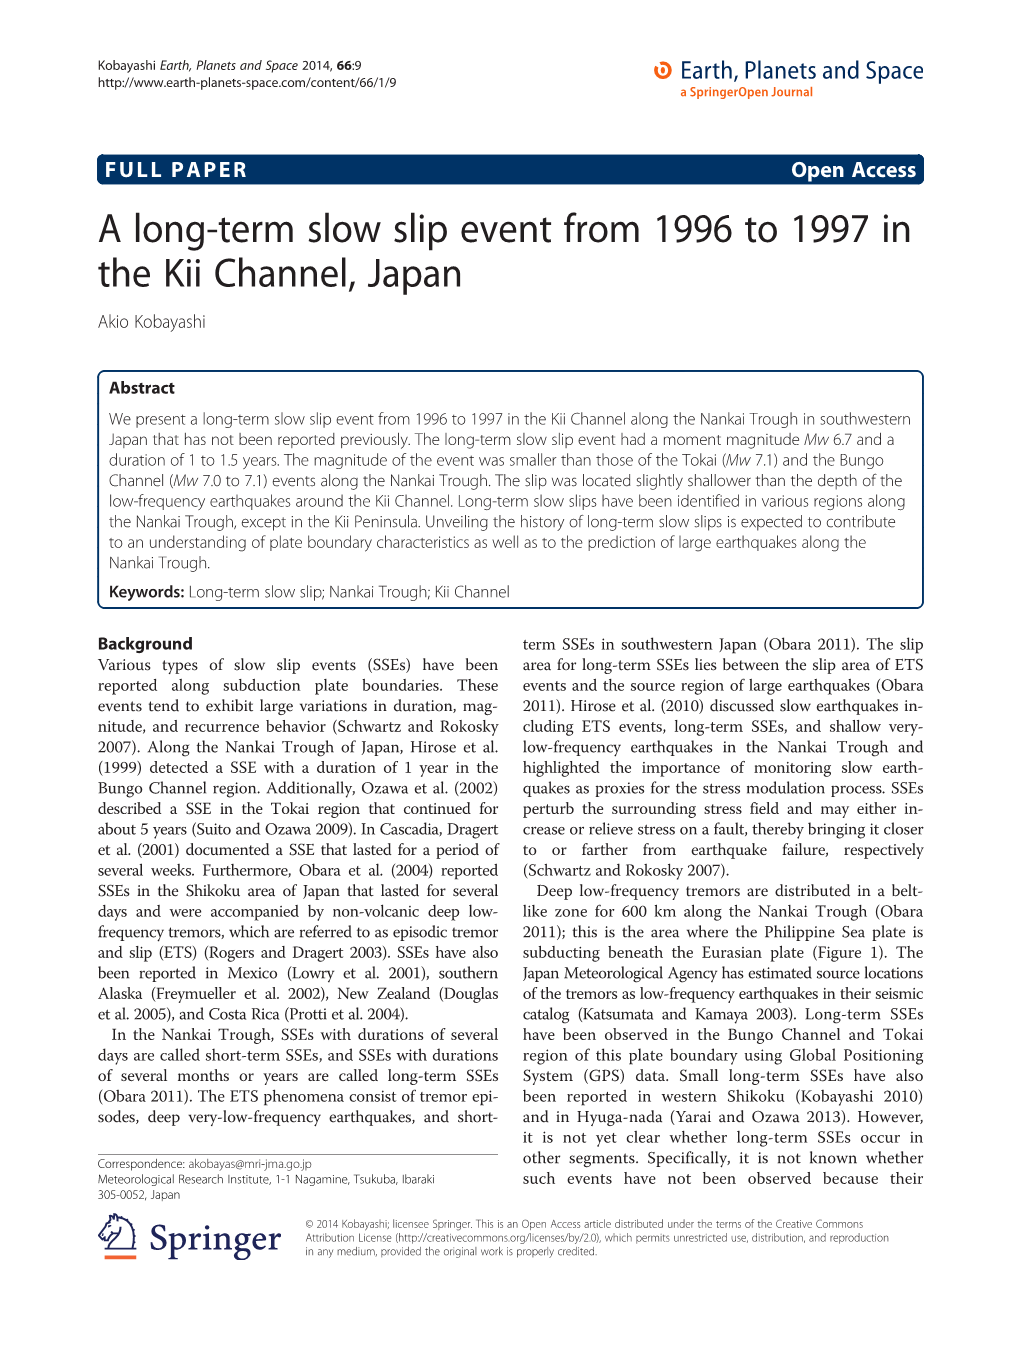 A Long-Term Slow Slip Event from 1996 to 1997 in the Kii Channel, Japan Akio Kobayashi